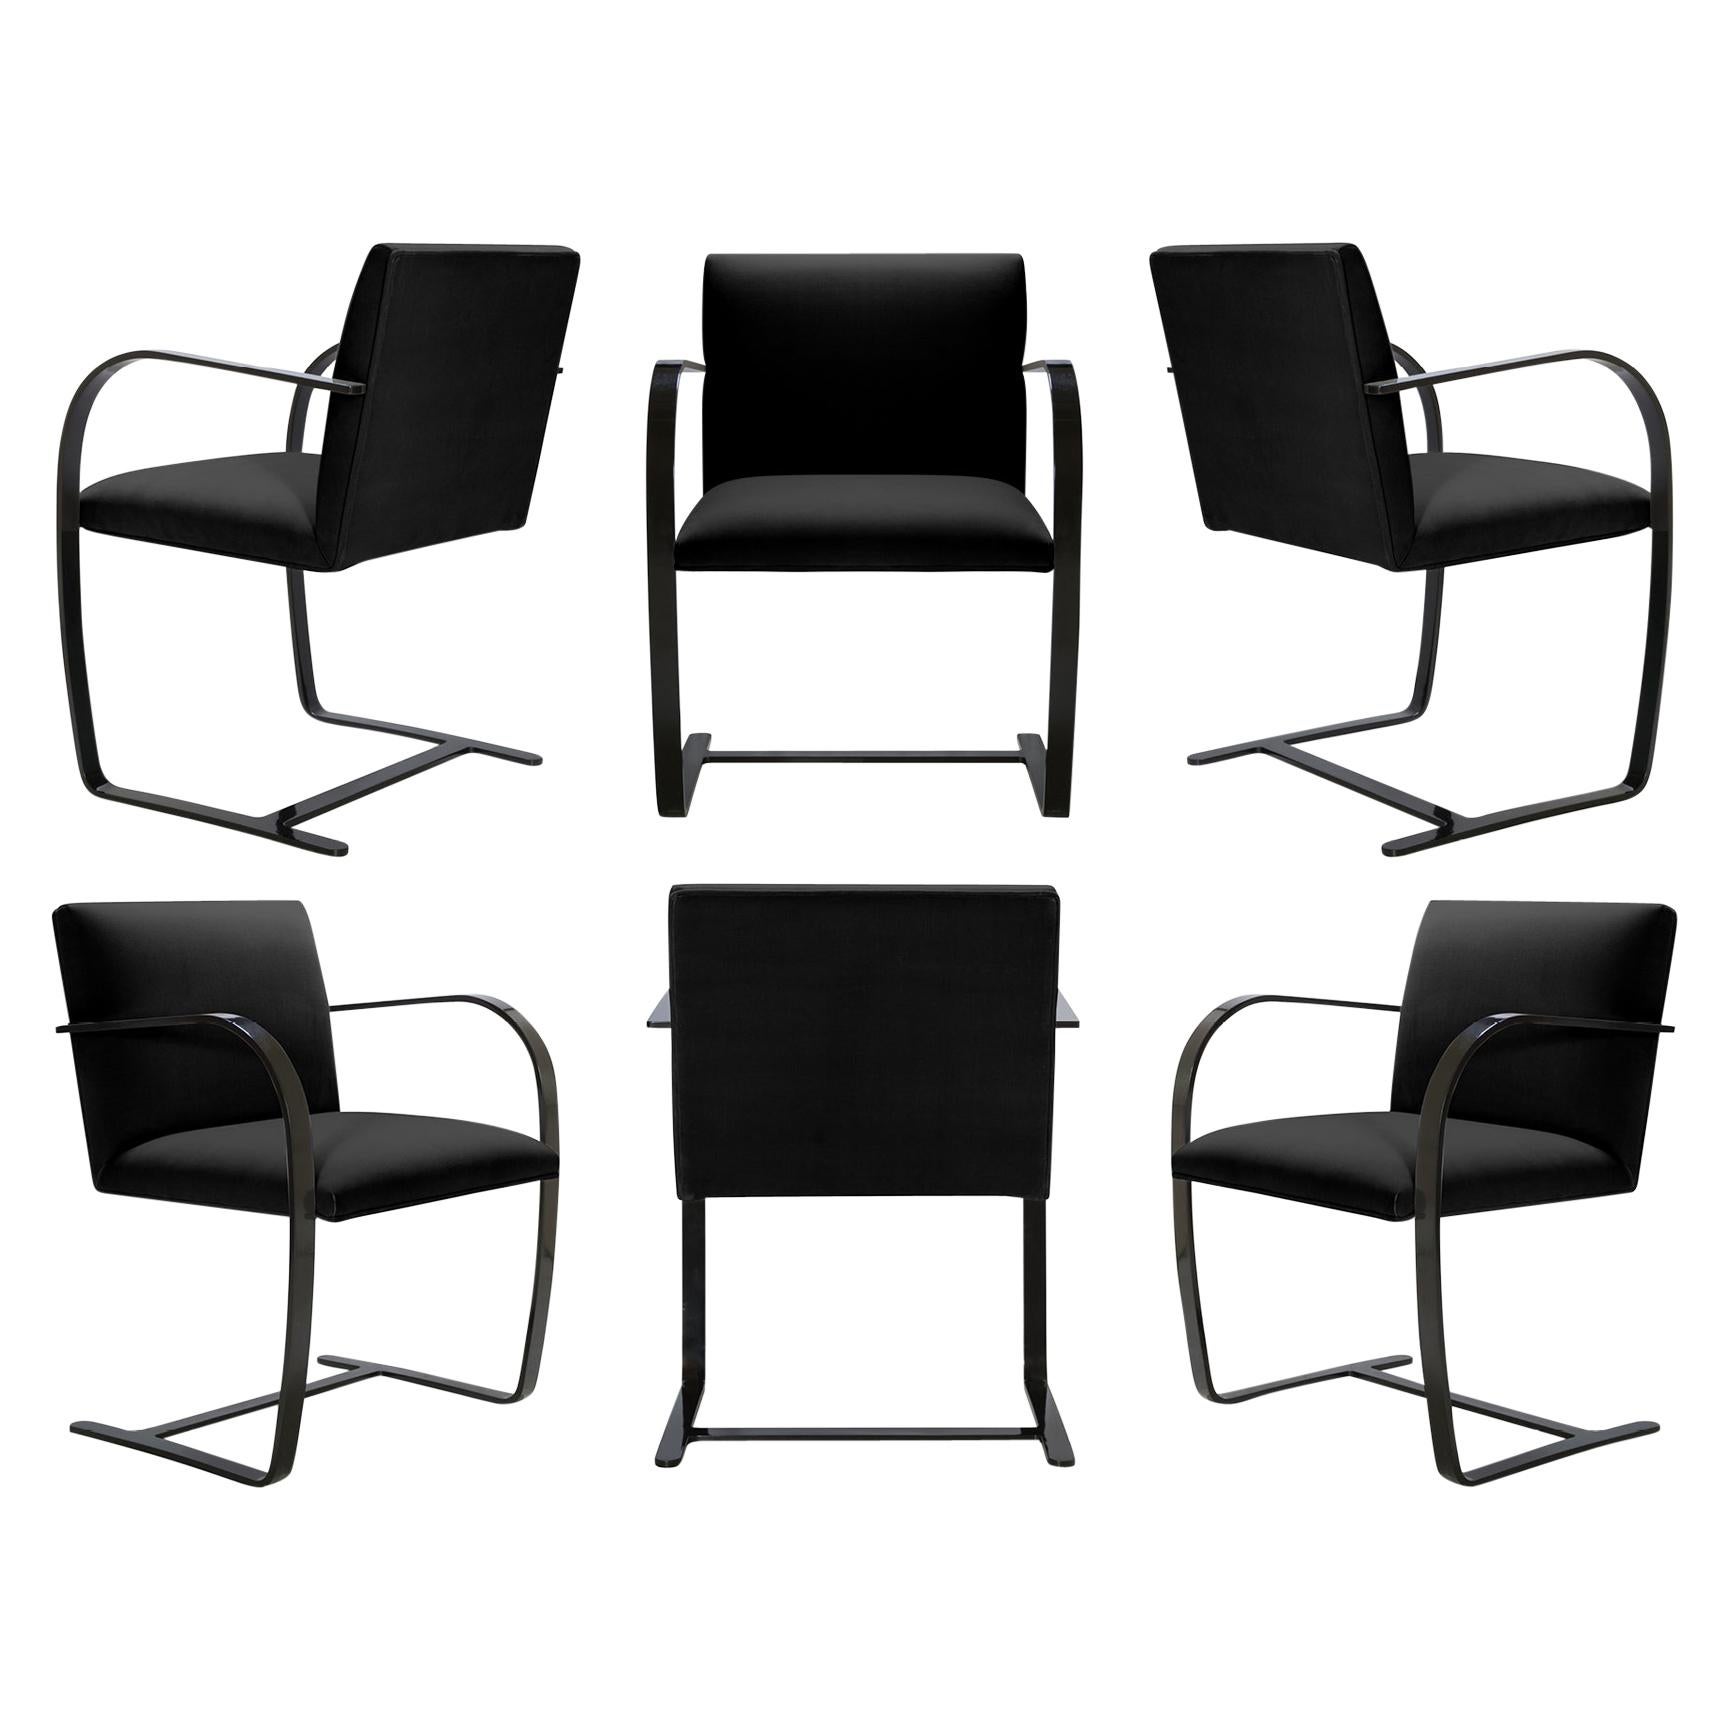 Brno Flat-Bar Chairs Velvet, Obsidian Gloss by Mies Van Der Rohe for Knoll, 6